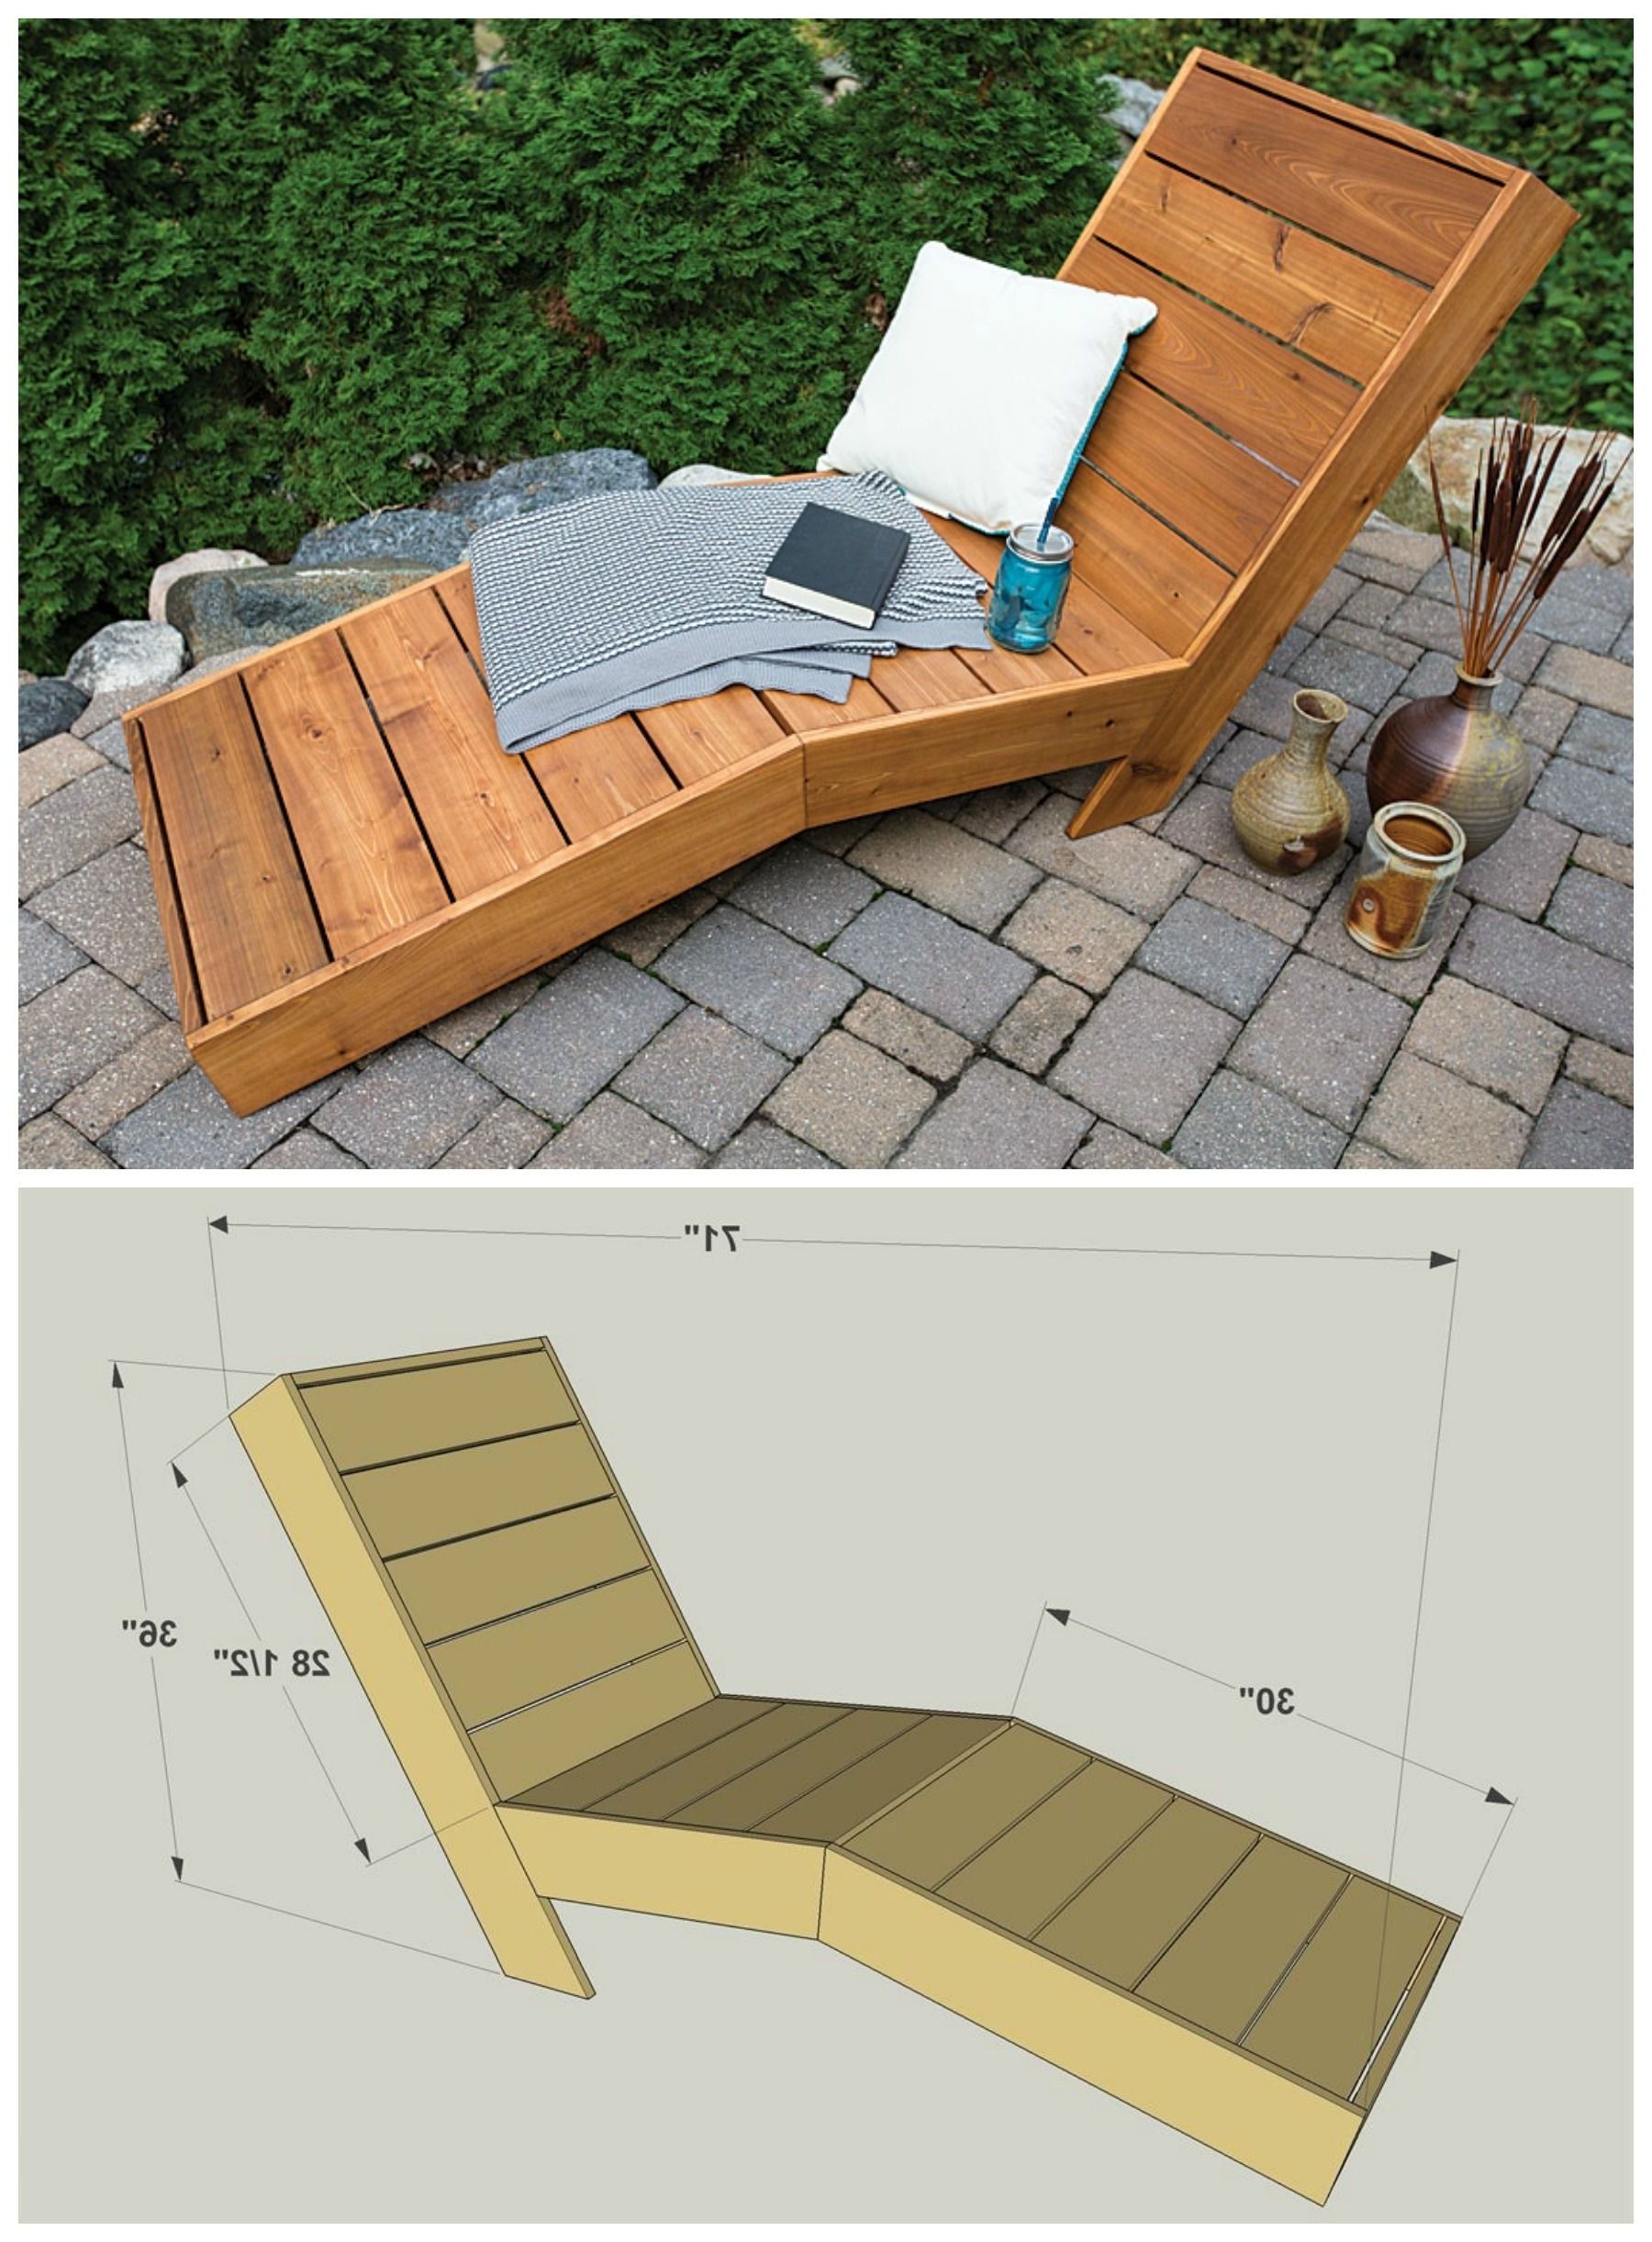 Most Recent Diy Chaise Lounge Chairs Within Diy Outdoor Chaise Lounge :: Free Plans At Buildsomething (View 10 of 15)